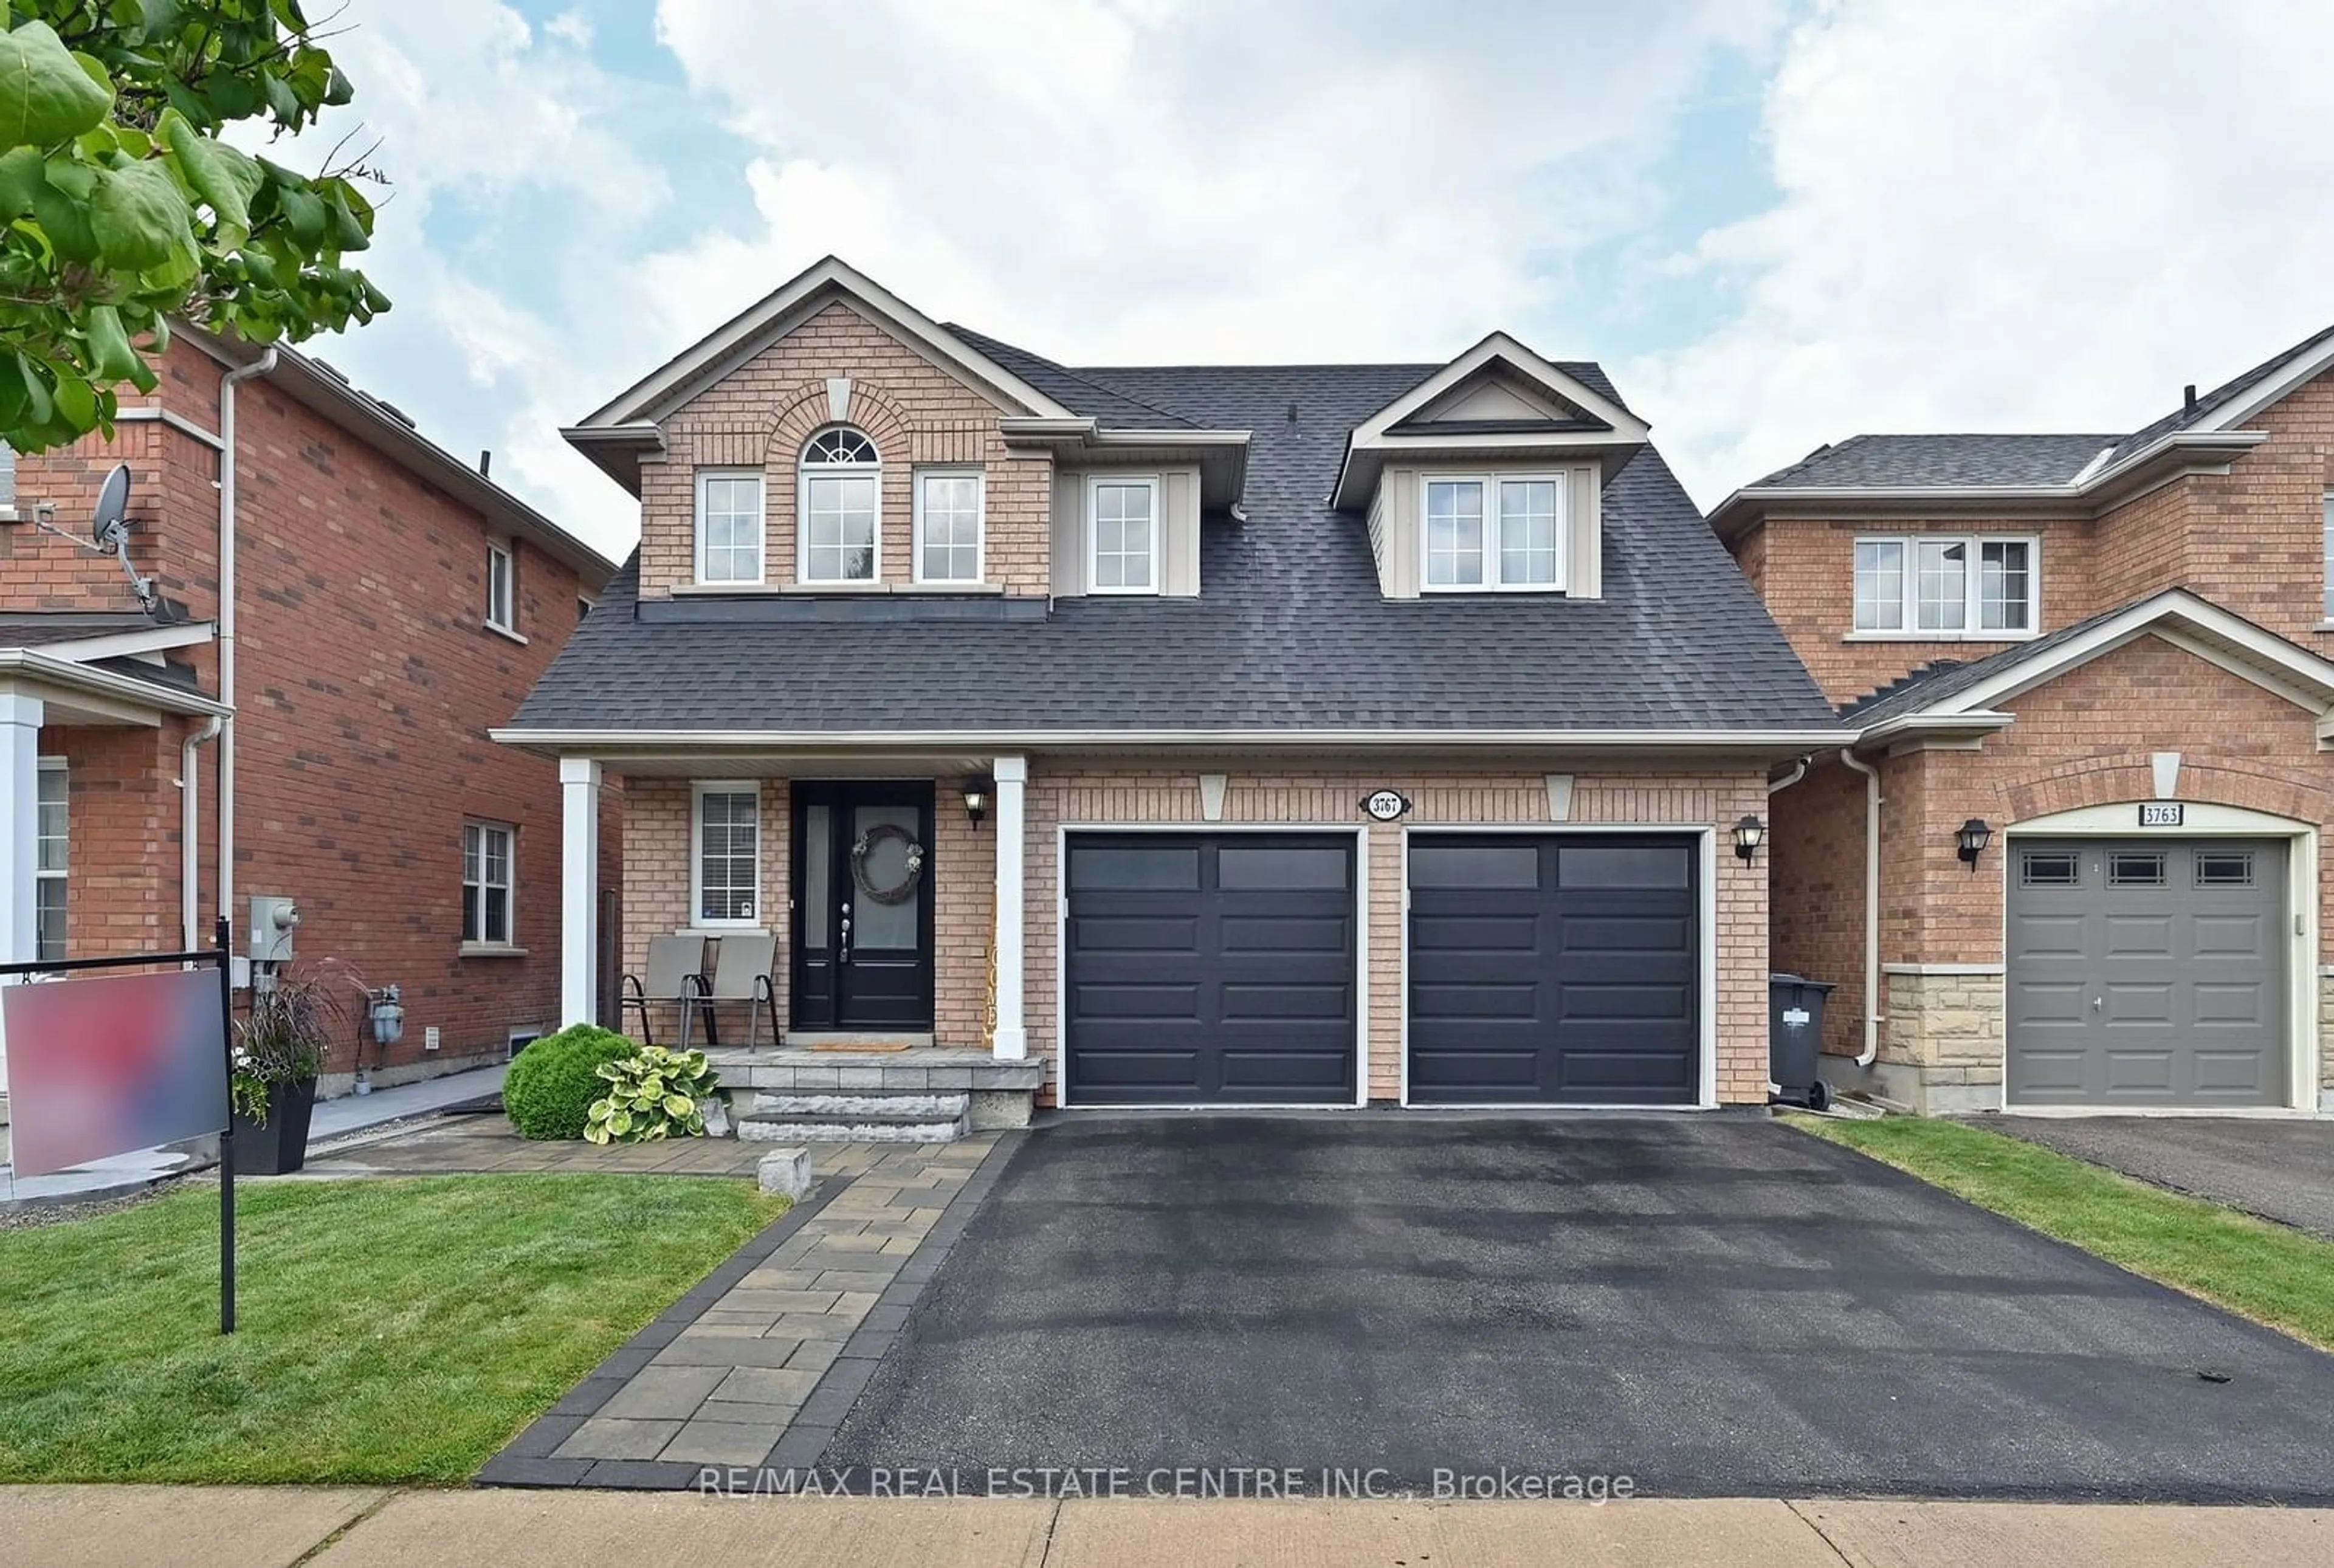 Home with brick exterior material for 3767 Pearlstone Dr, Mississauga Ontario L5M 7H1